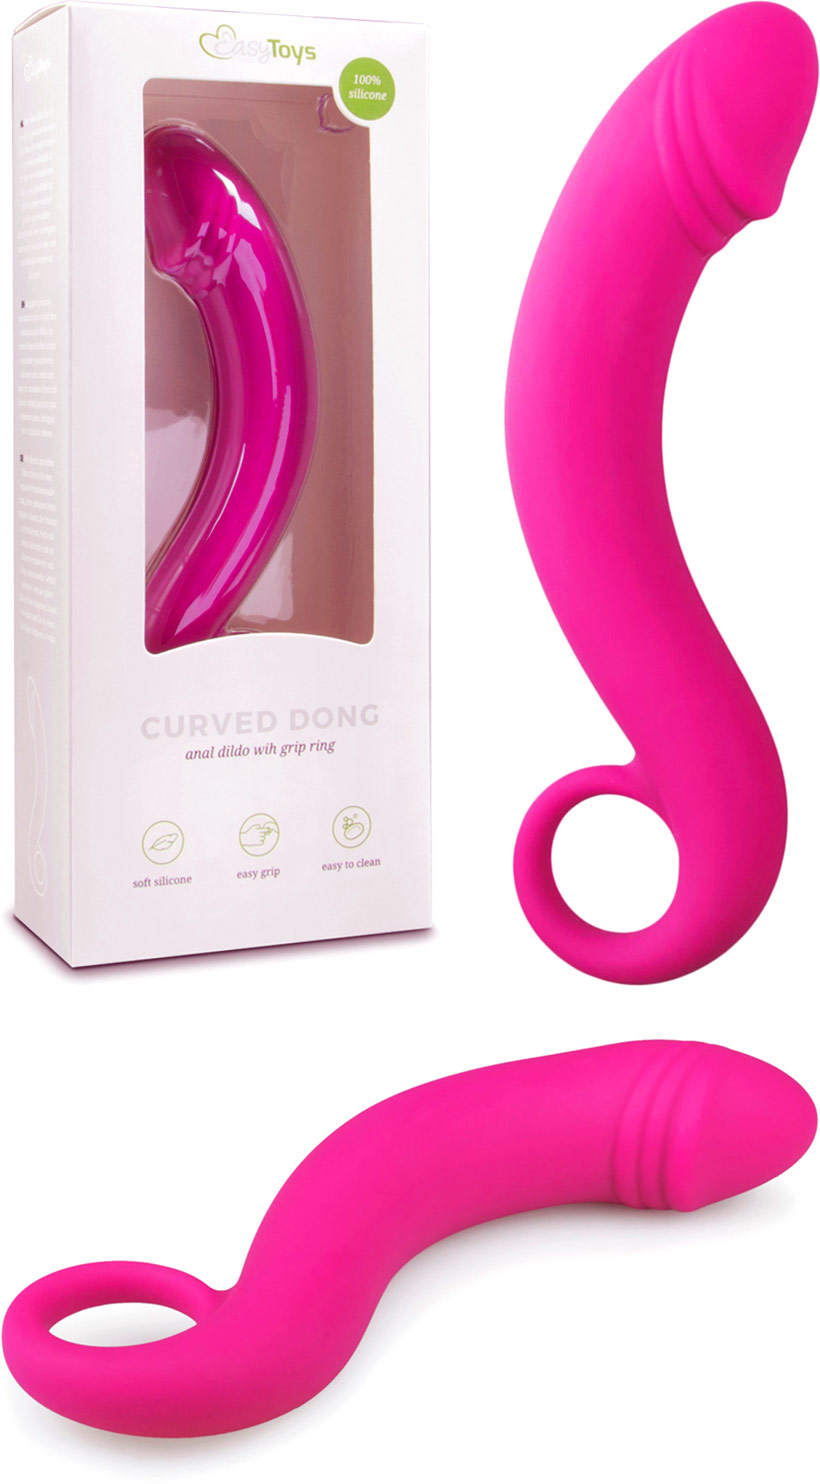 EasyToys Curved Dong curved dildo